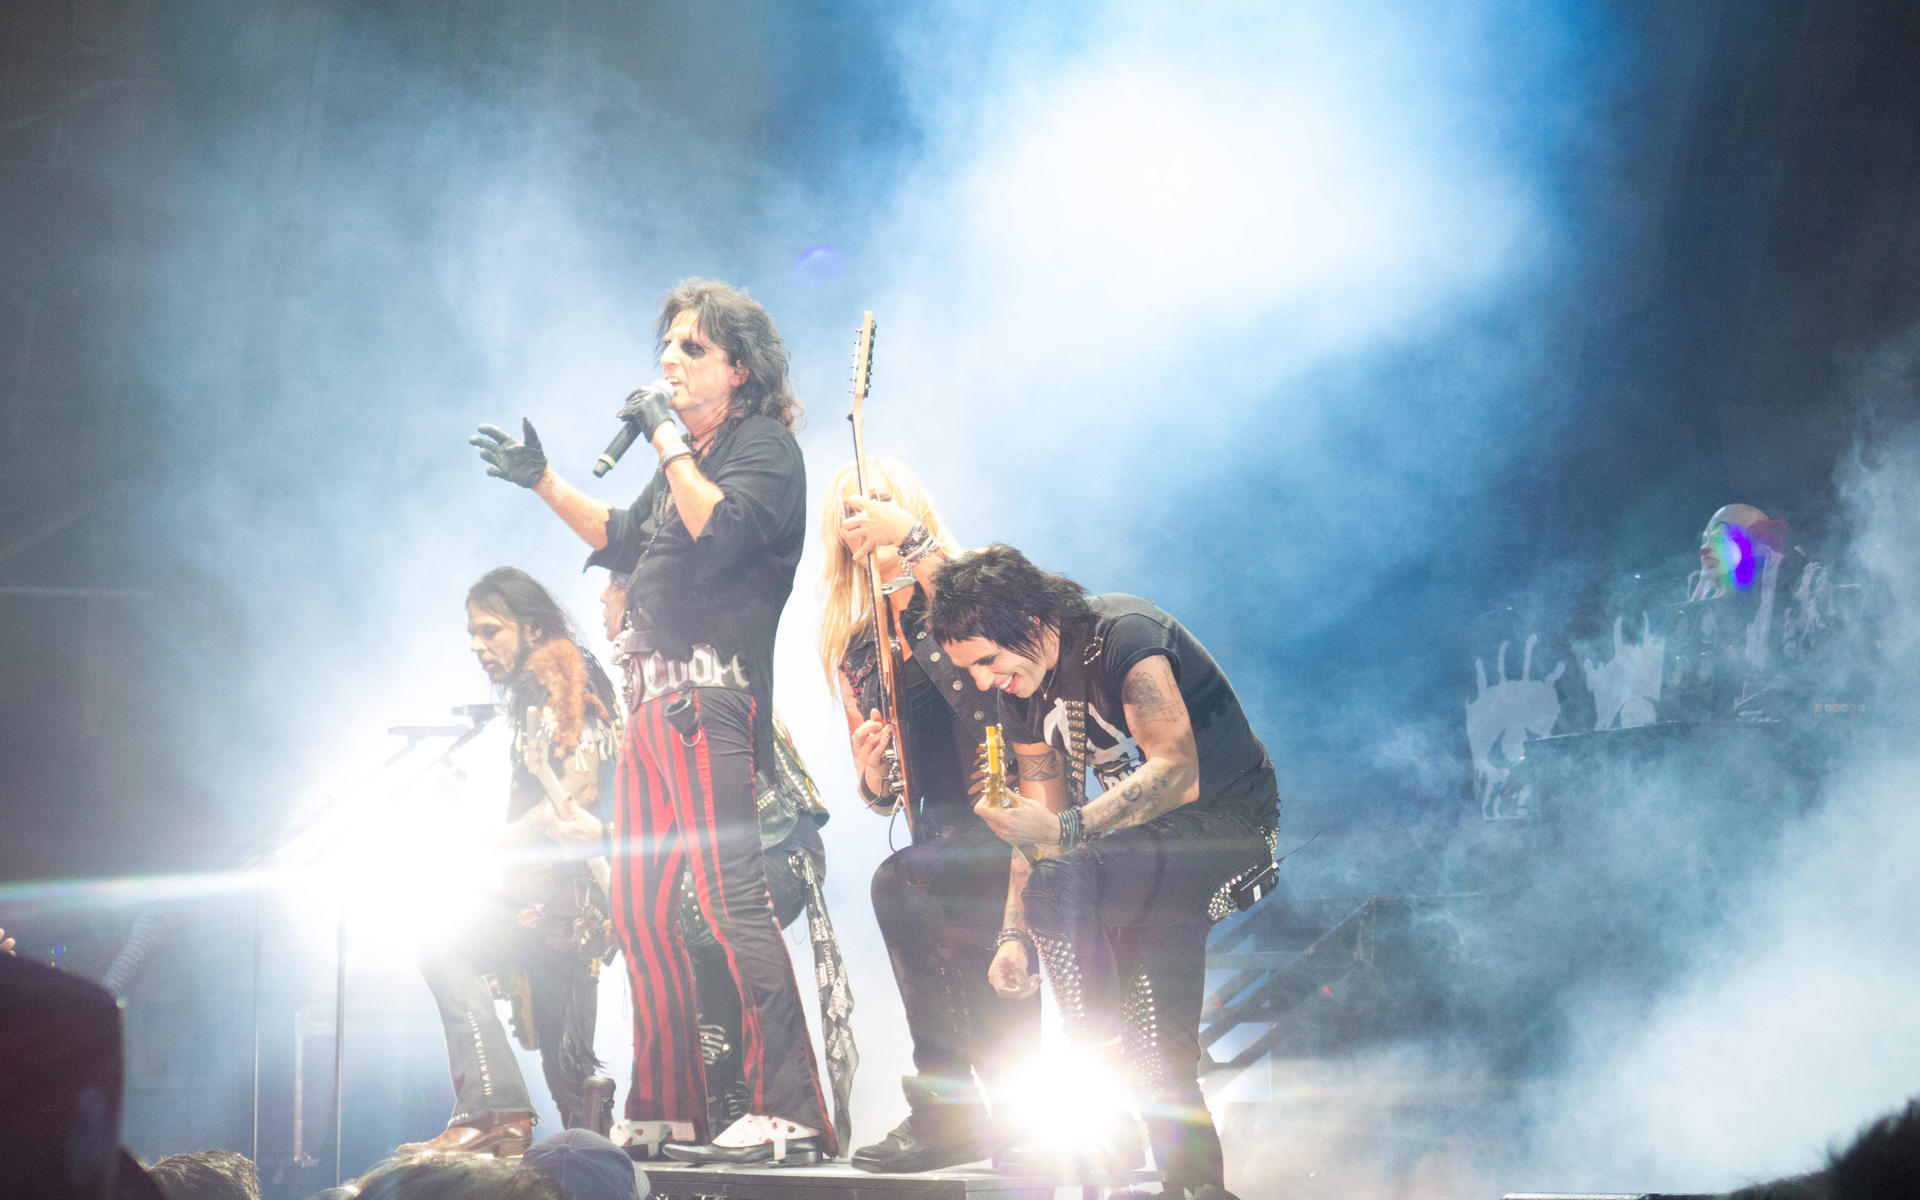 One last time: Alice Cooper (with microphone) opens for Mötley Crüe at the Hollywood Bowl on their final tour. Photos: Corbis, Redferns